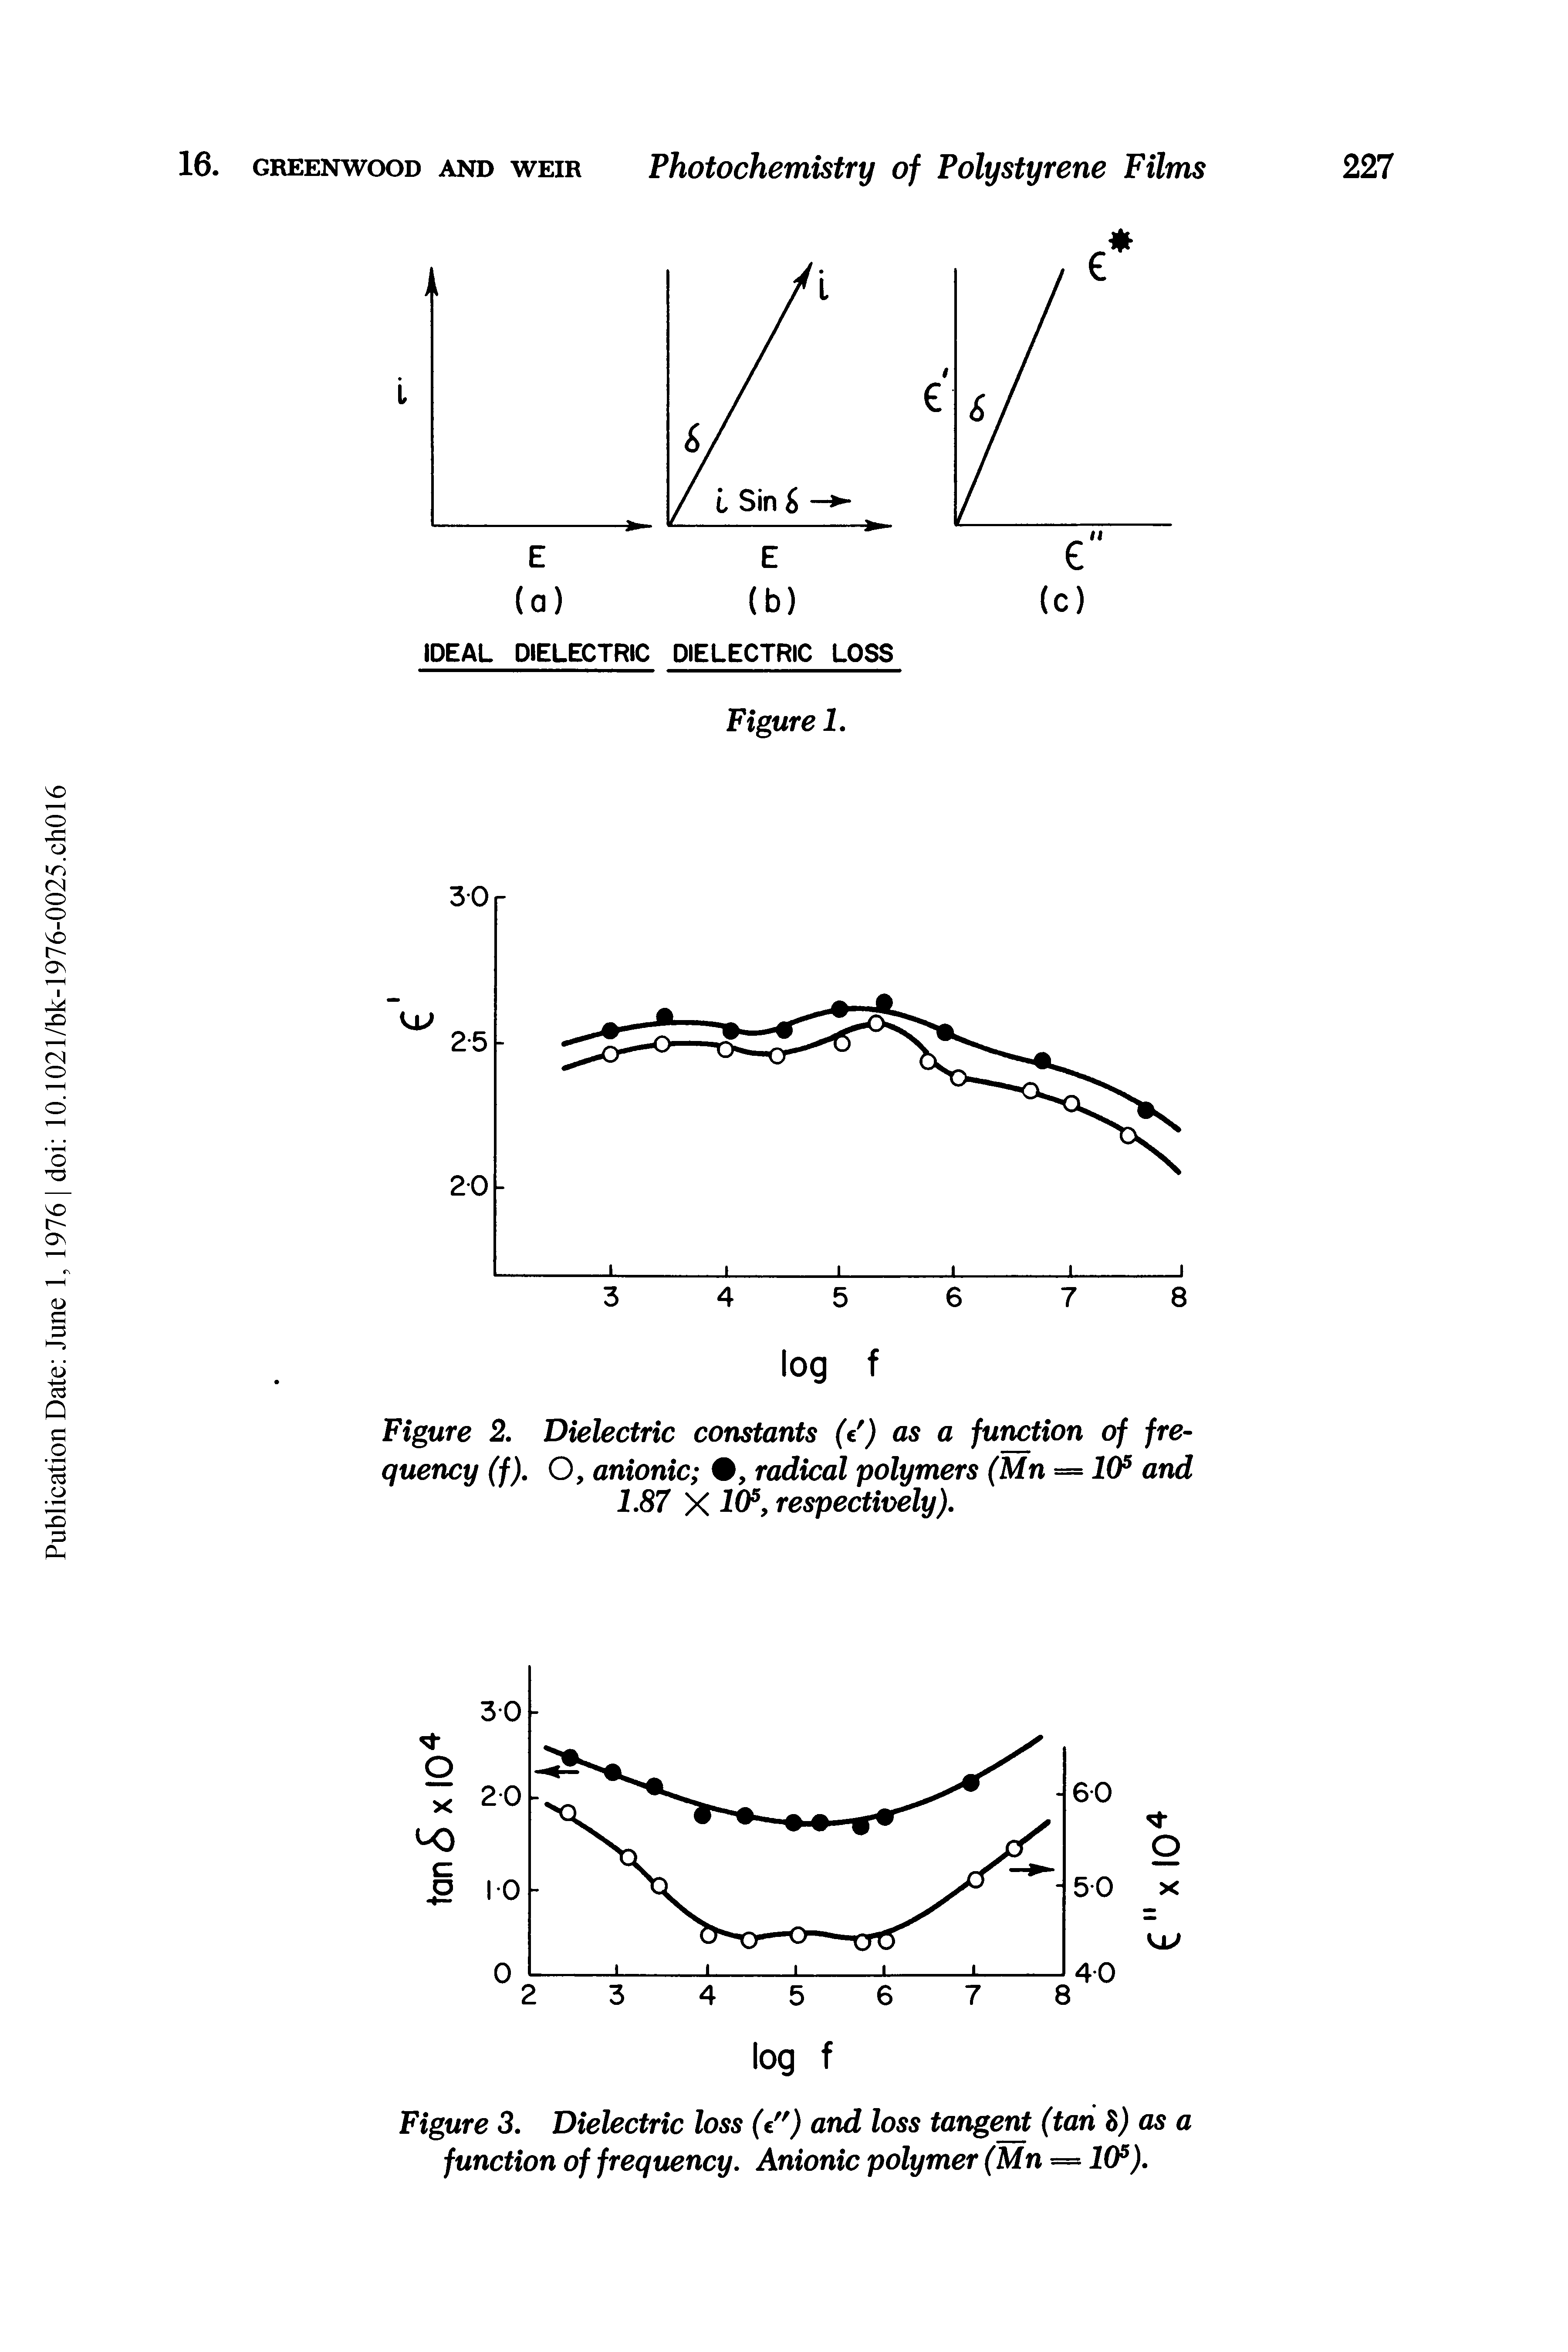 Figure 3. Dielectric loss (V j and loss tangent (tan l) as a function of frequency. Anionic polymer (Mn = 10s).